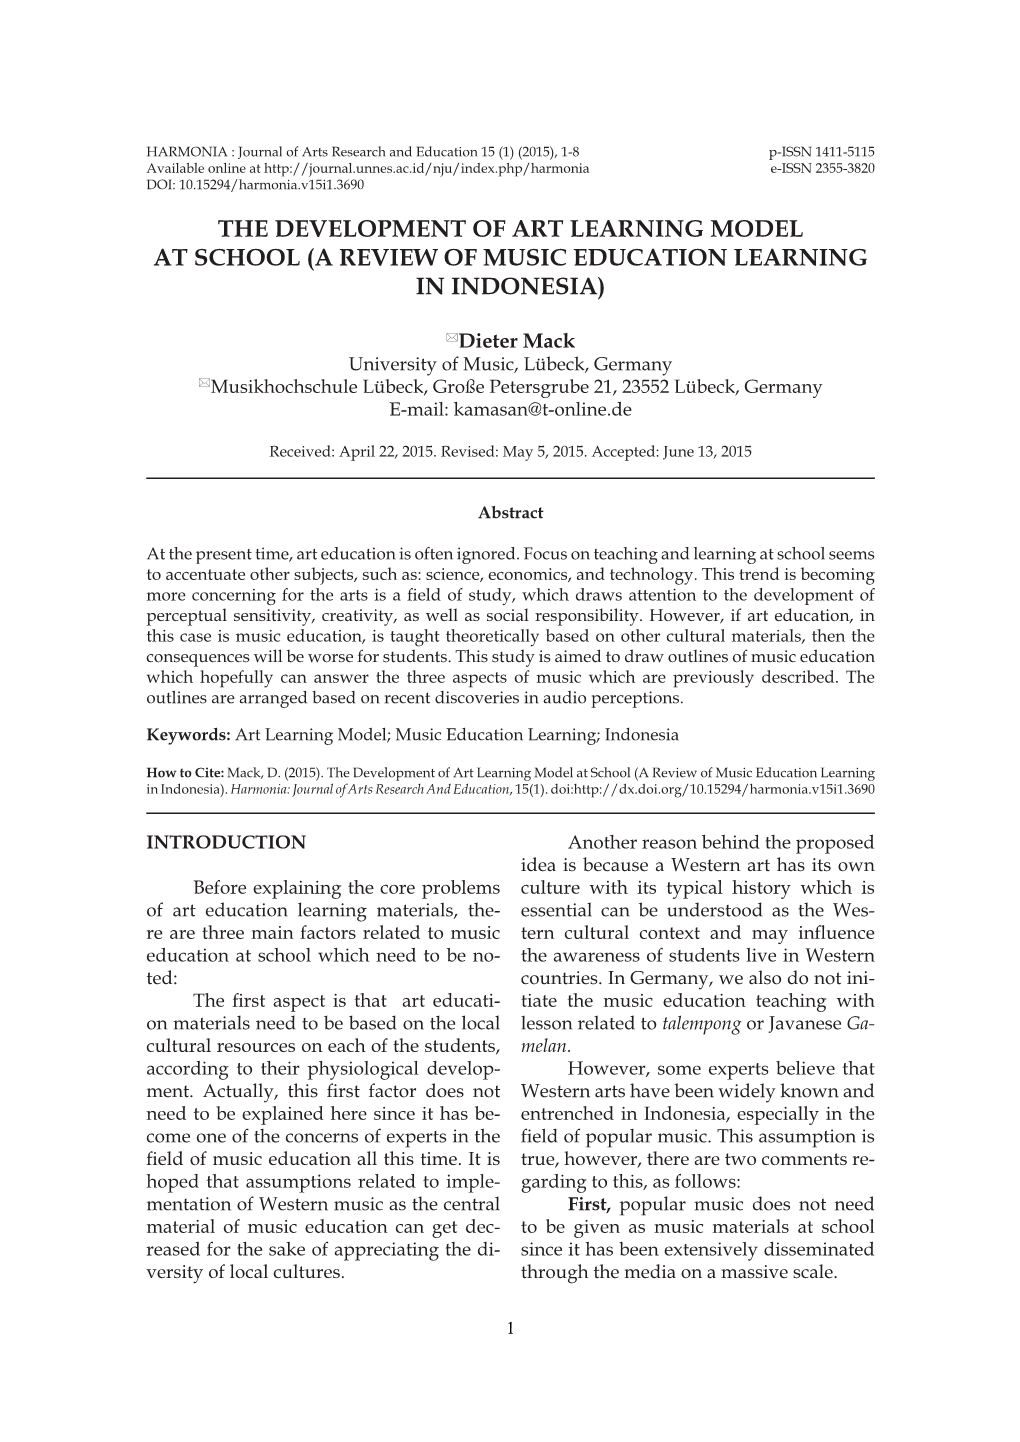 The Development of Art Learning Model at School (A Review of Music Education Learning in Indonesia)